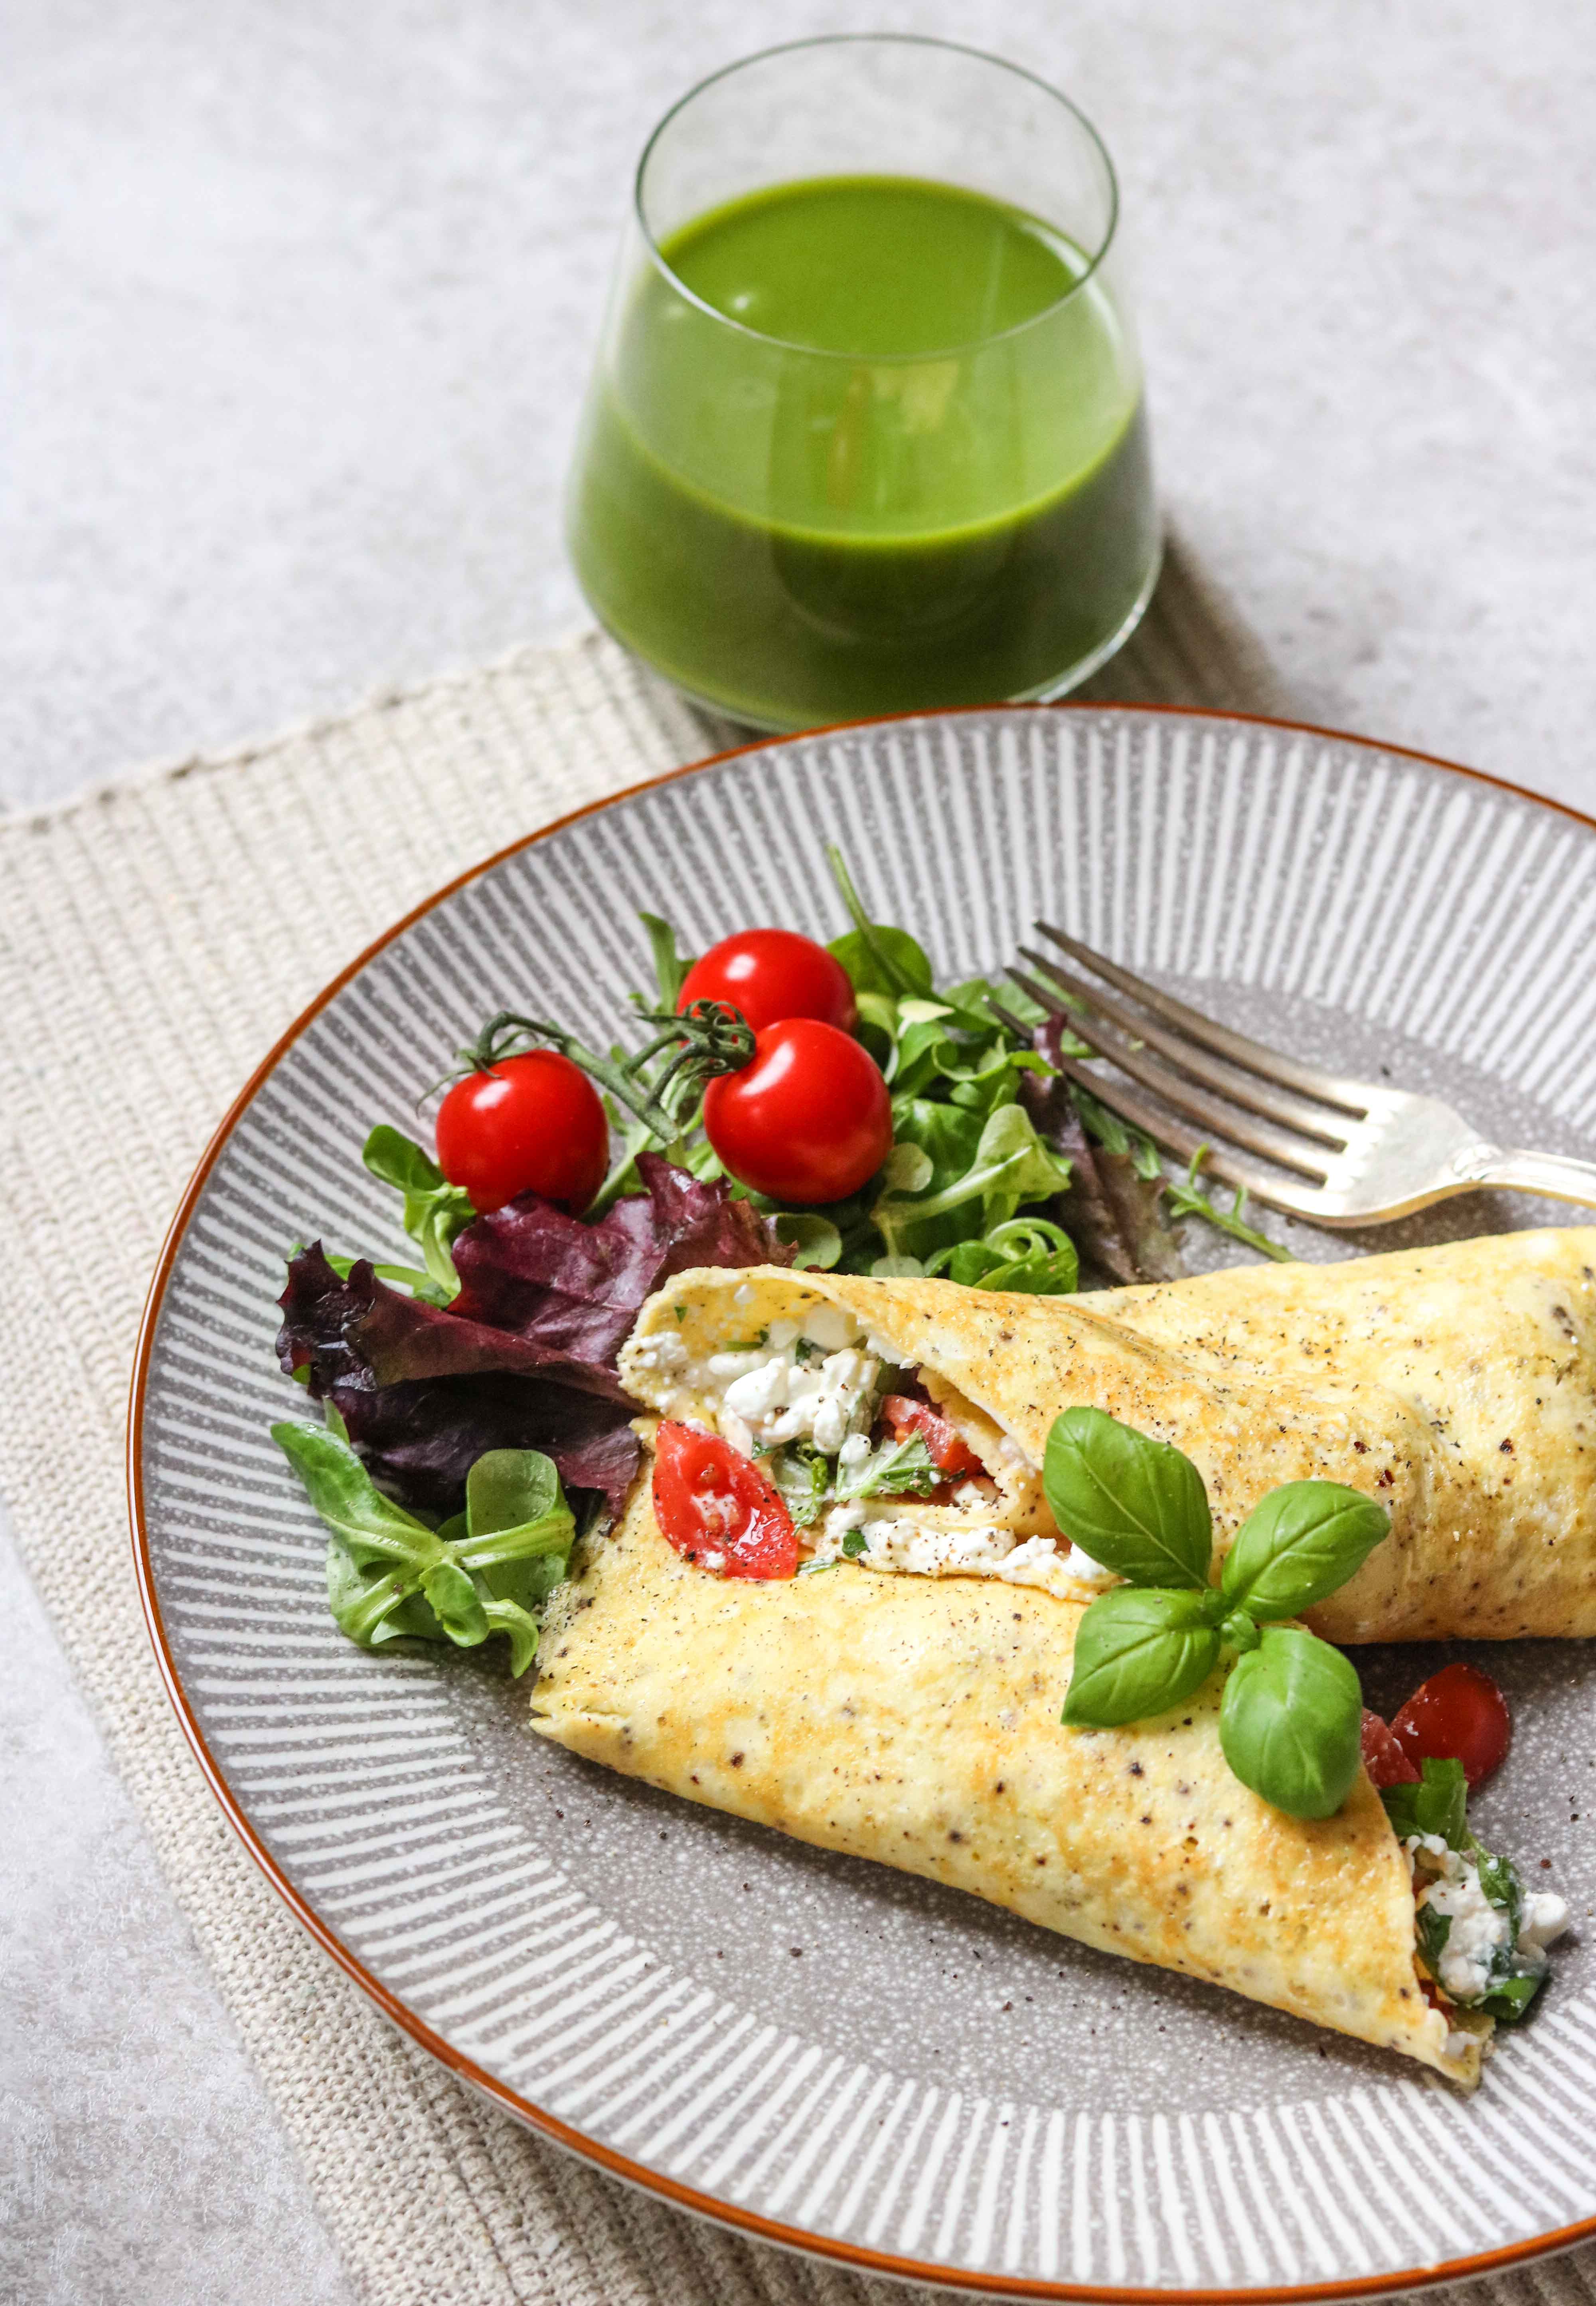 Omelette with cottage cheese and basil a great way to start the day.